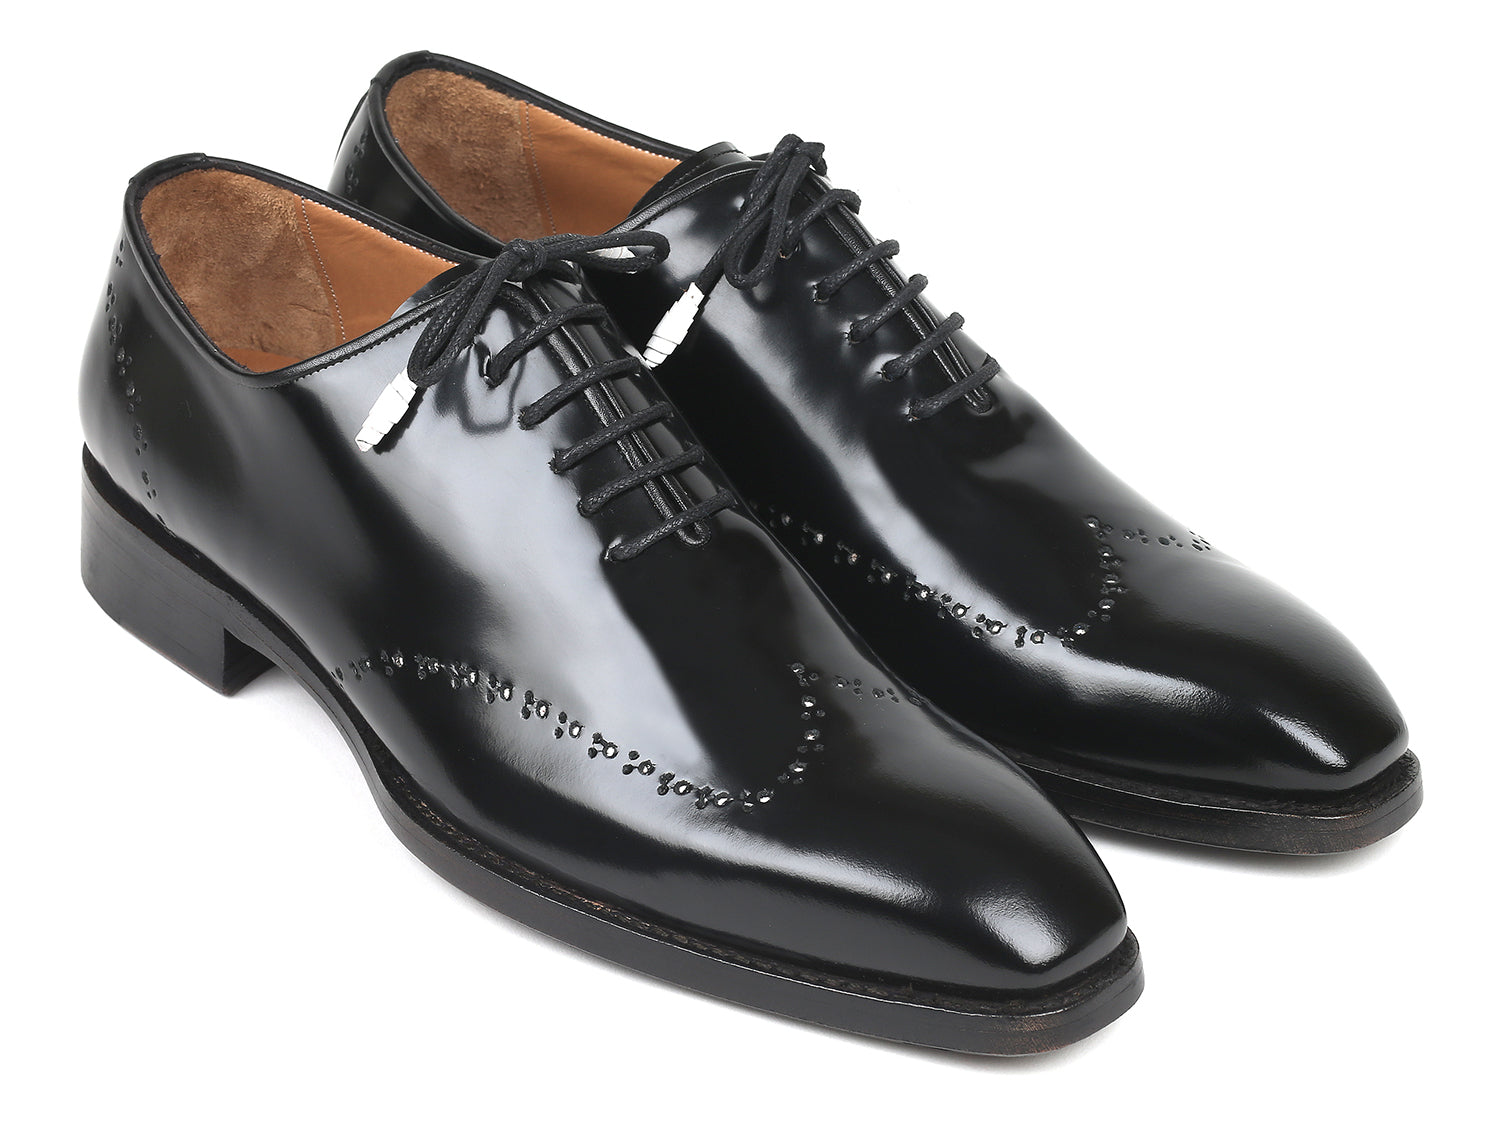 Goodyear Welted Leather Oxford Shoes